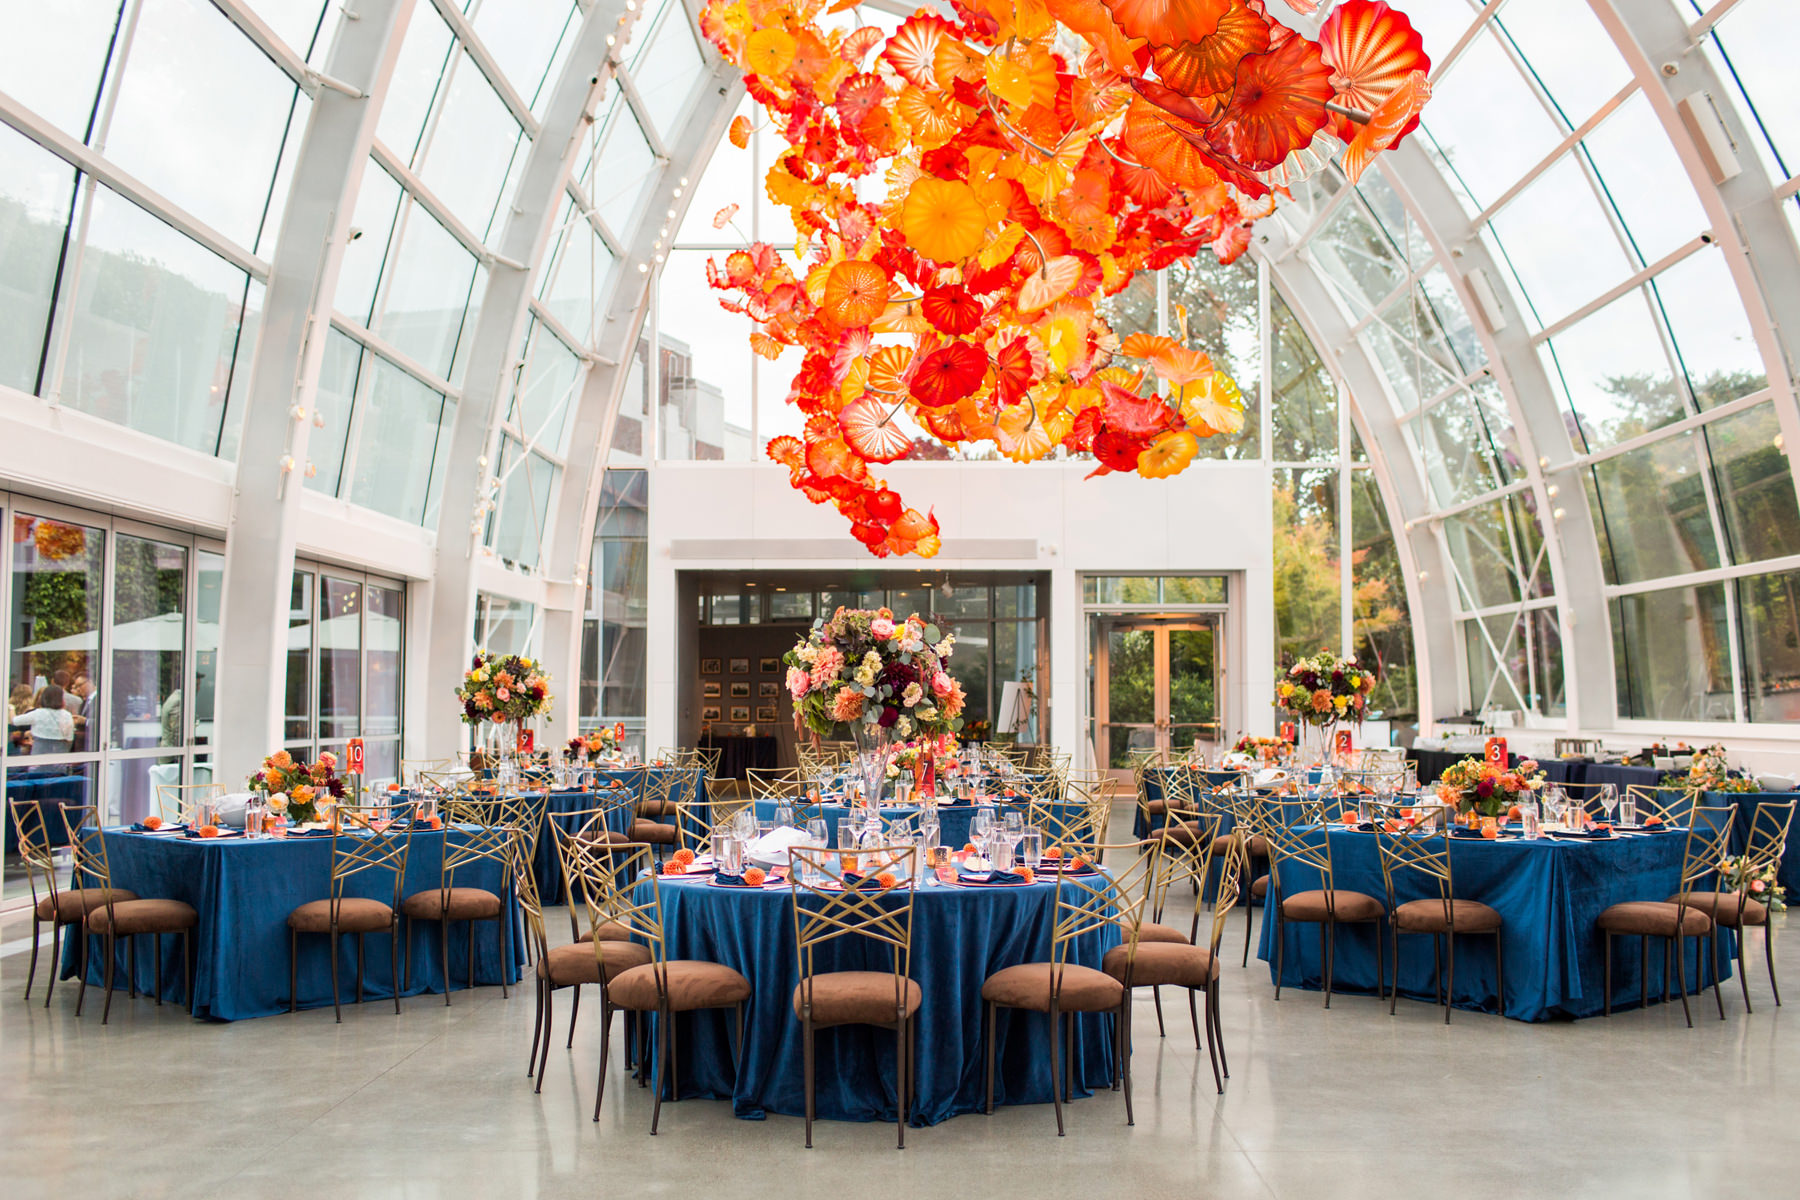 Chihuly Garden and Glass Wedding Interior Reception